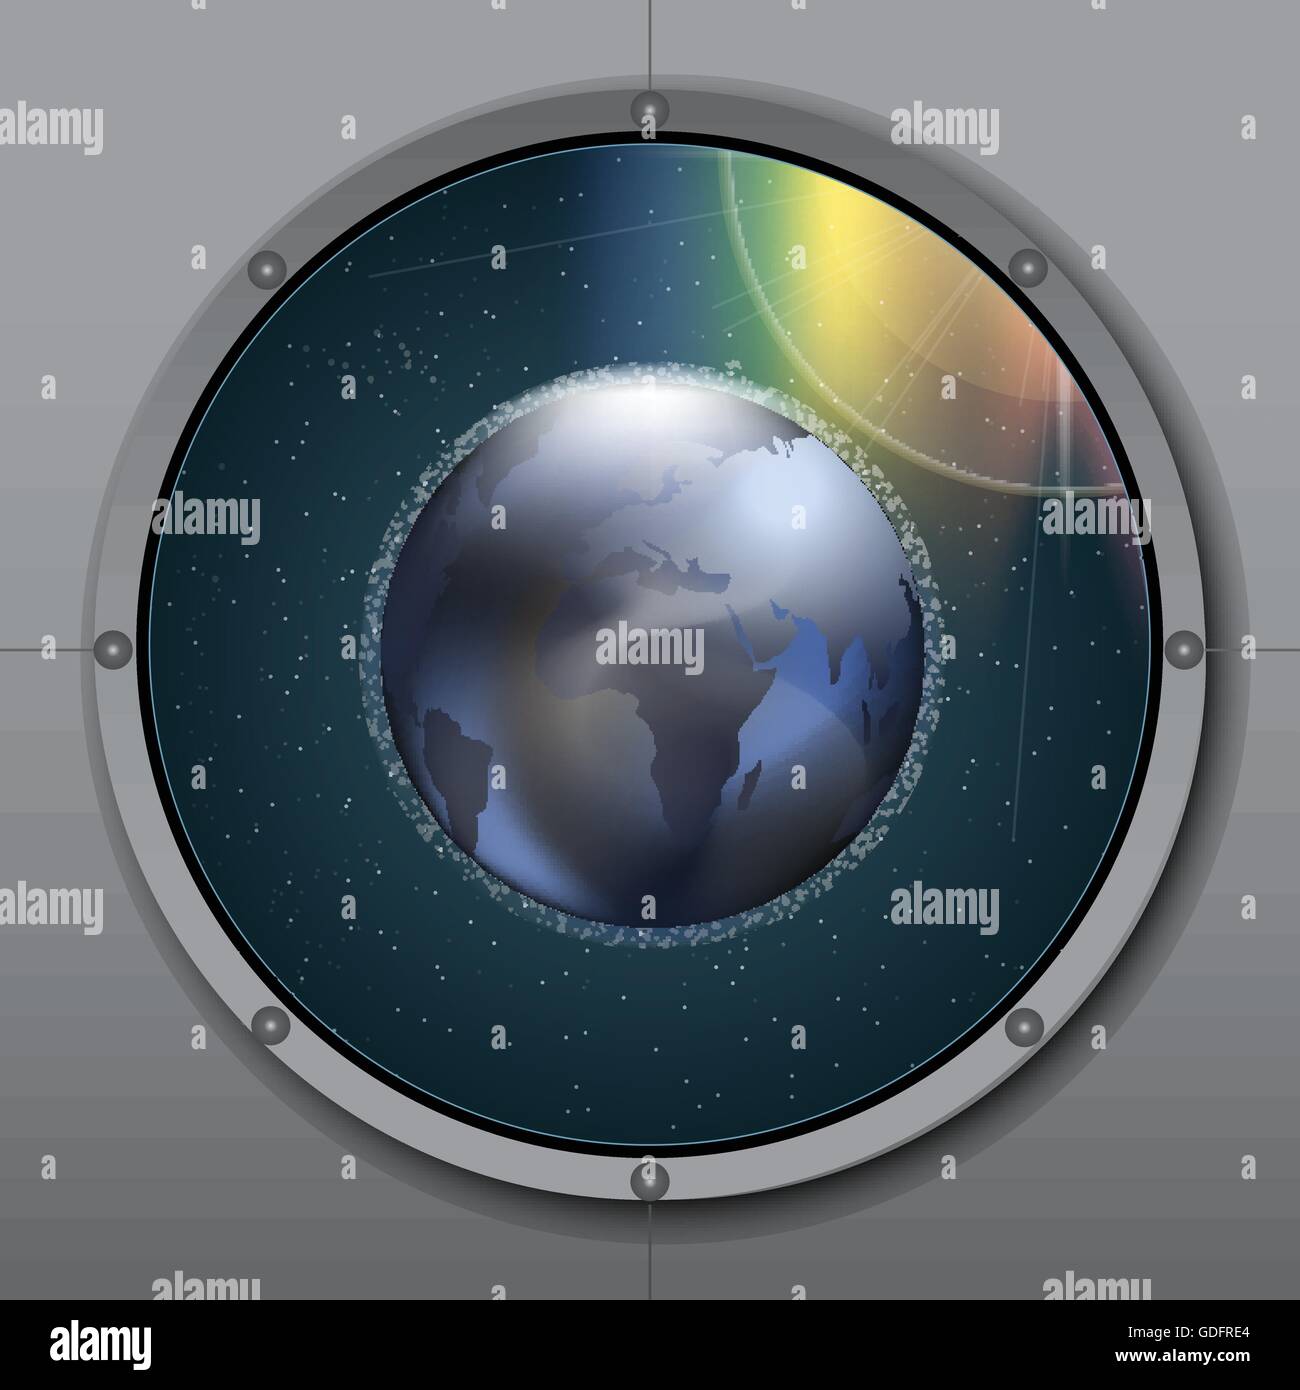 View from rocket or ship porthole on planet earth in space over a background with glowing stars. Digital vector image Stock Vector